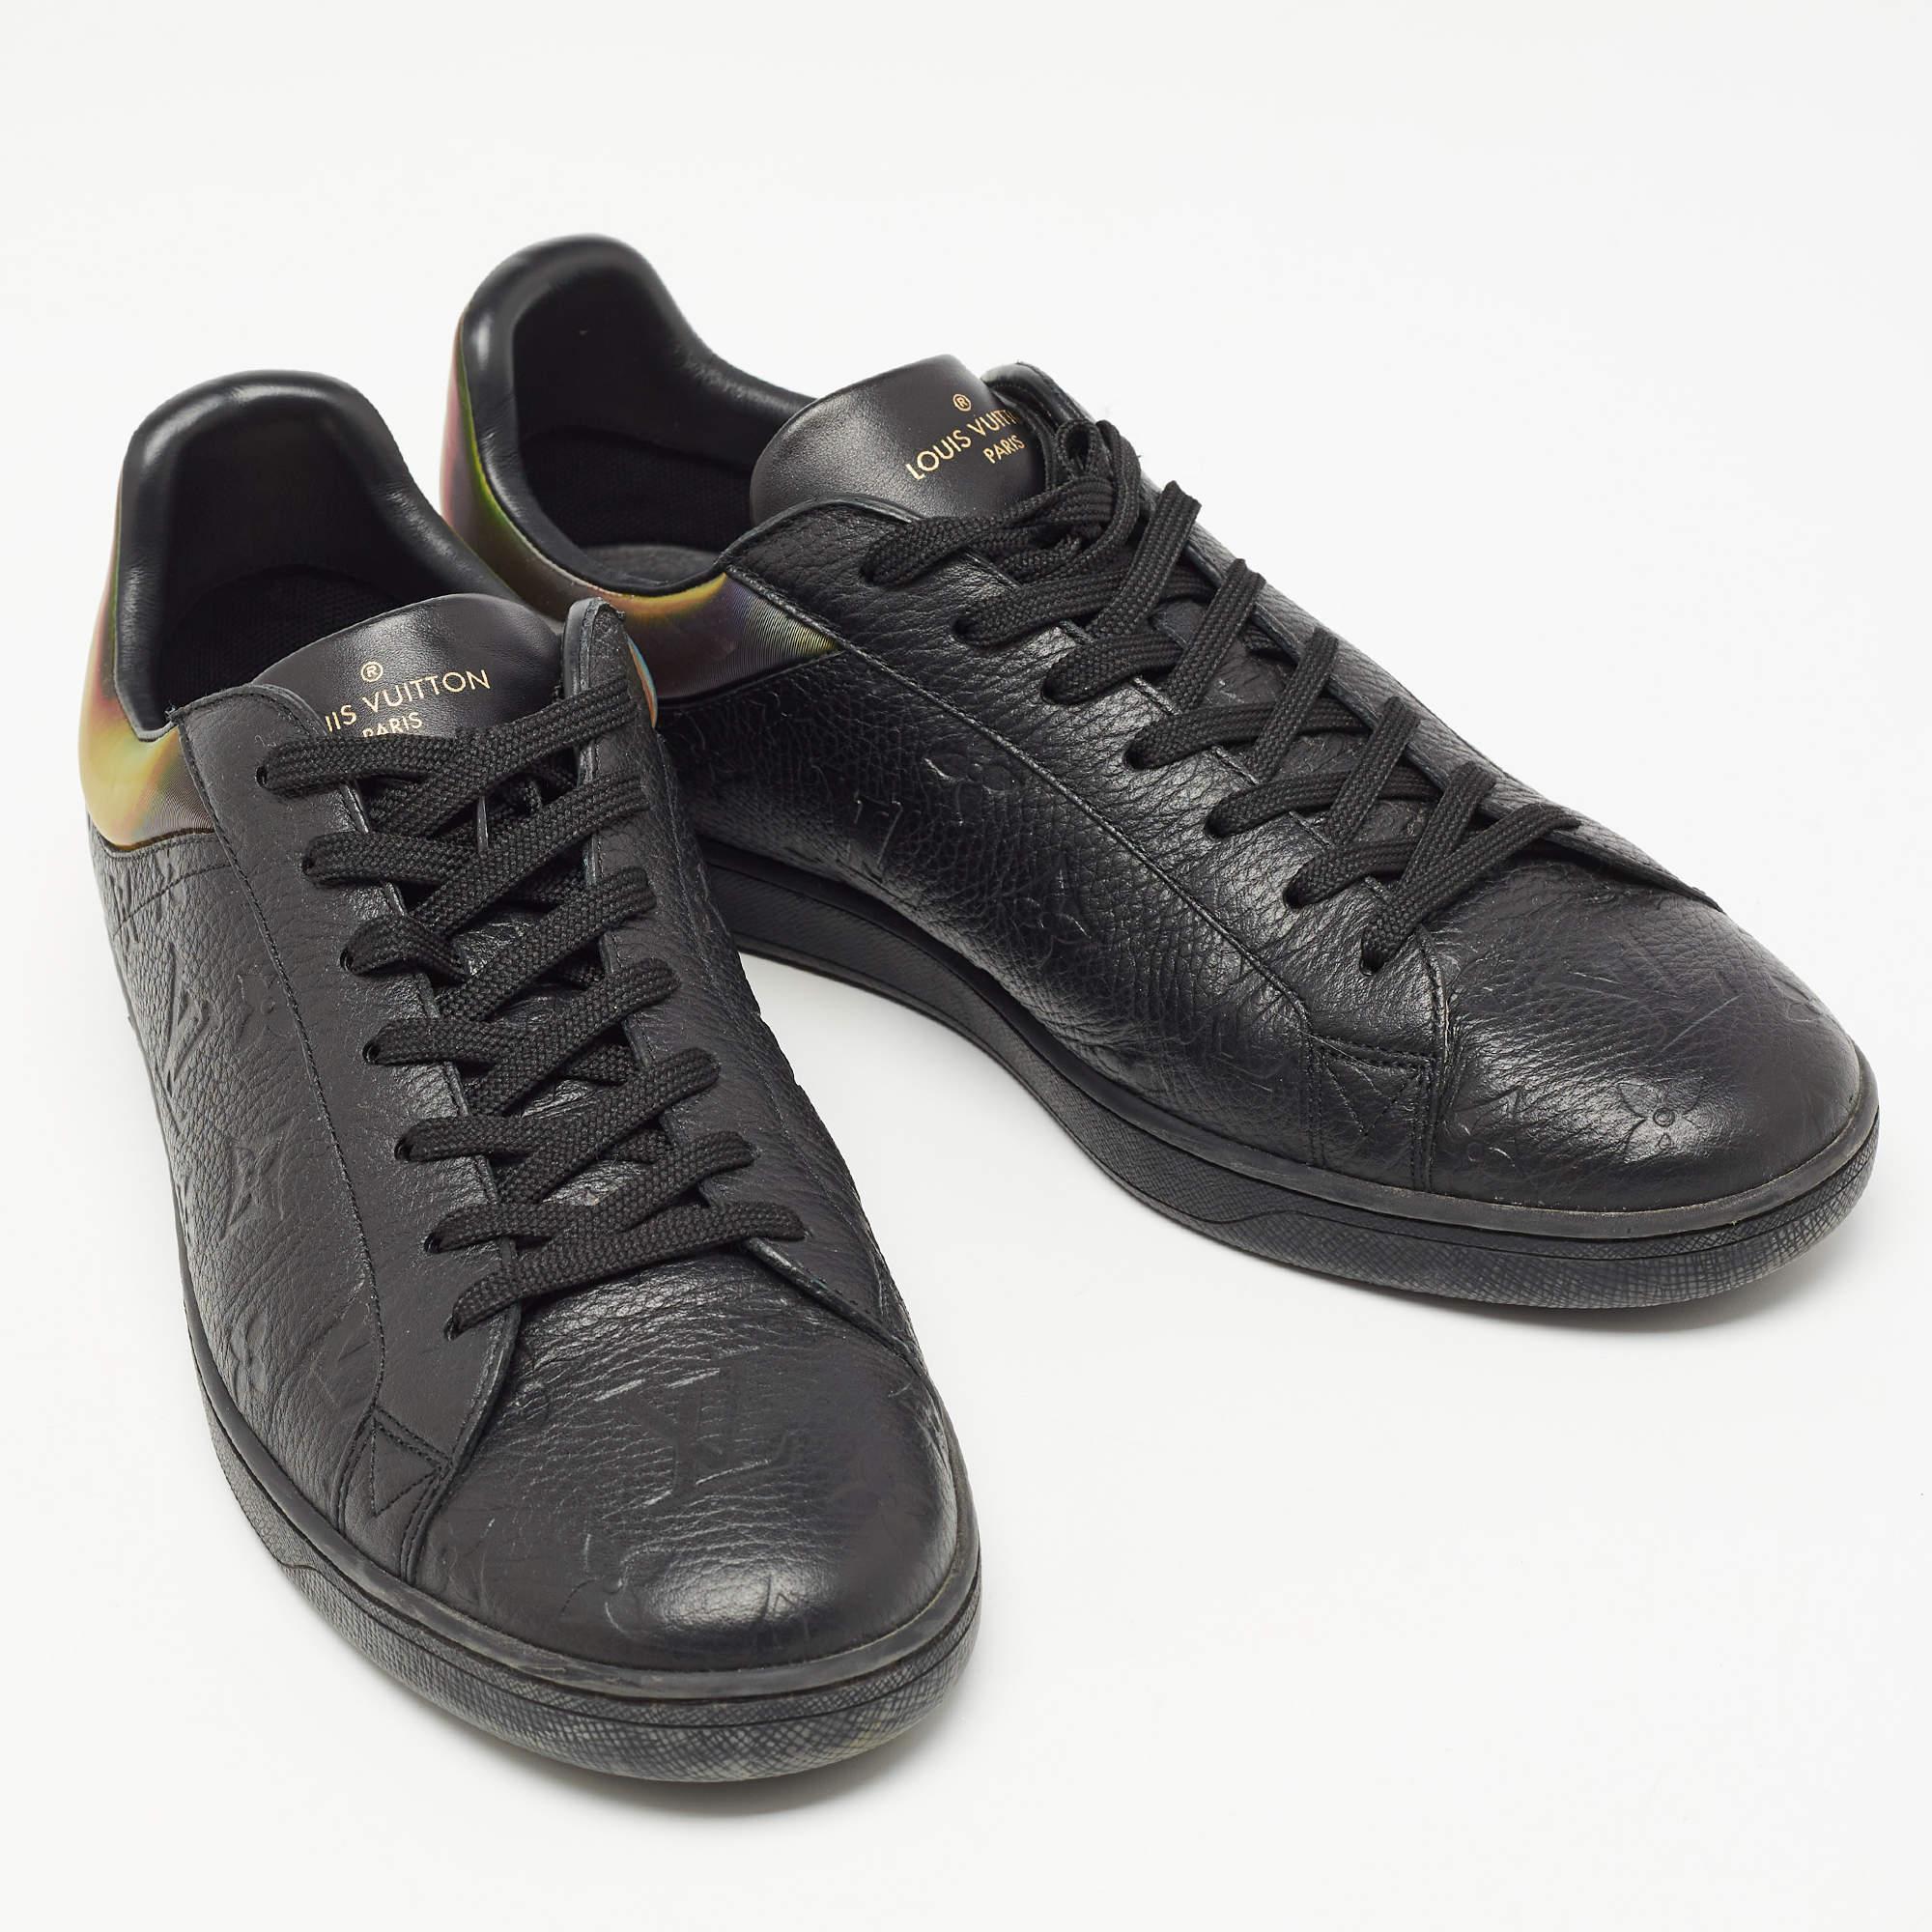 Women's Louis Vuitton Black Monogram Embossed Leather Luxembourg Sneakers Size 42.5